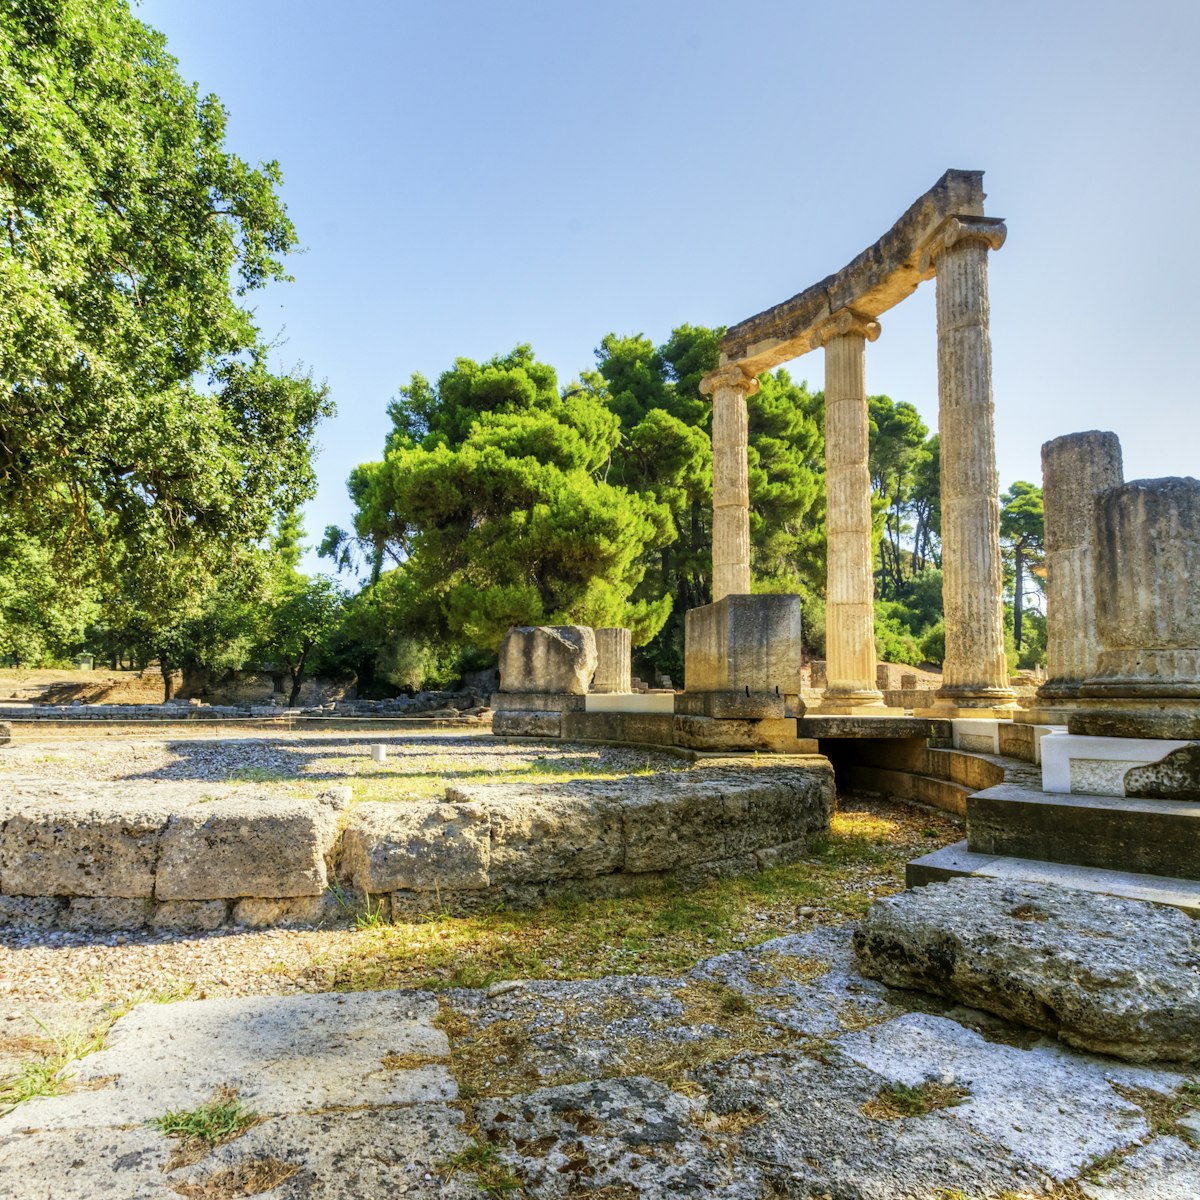 Ruins of the ancient site of Olympia, specifically the Philippeion in the Altis of Olympia, which was an Ionic circular memorial of ivory and gold. The Olympic games originate from there.